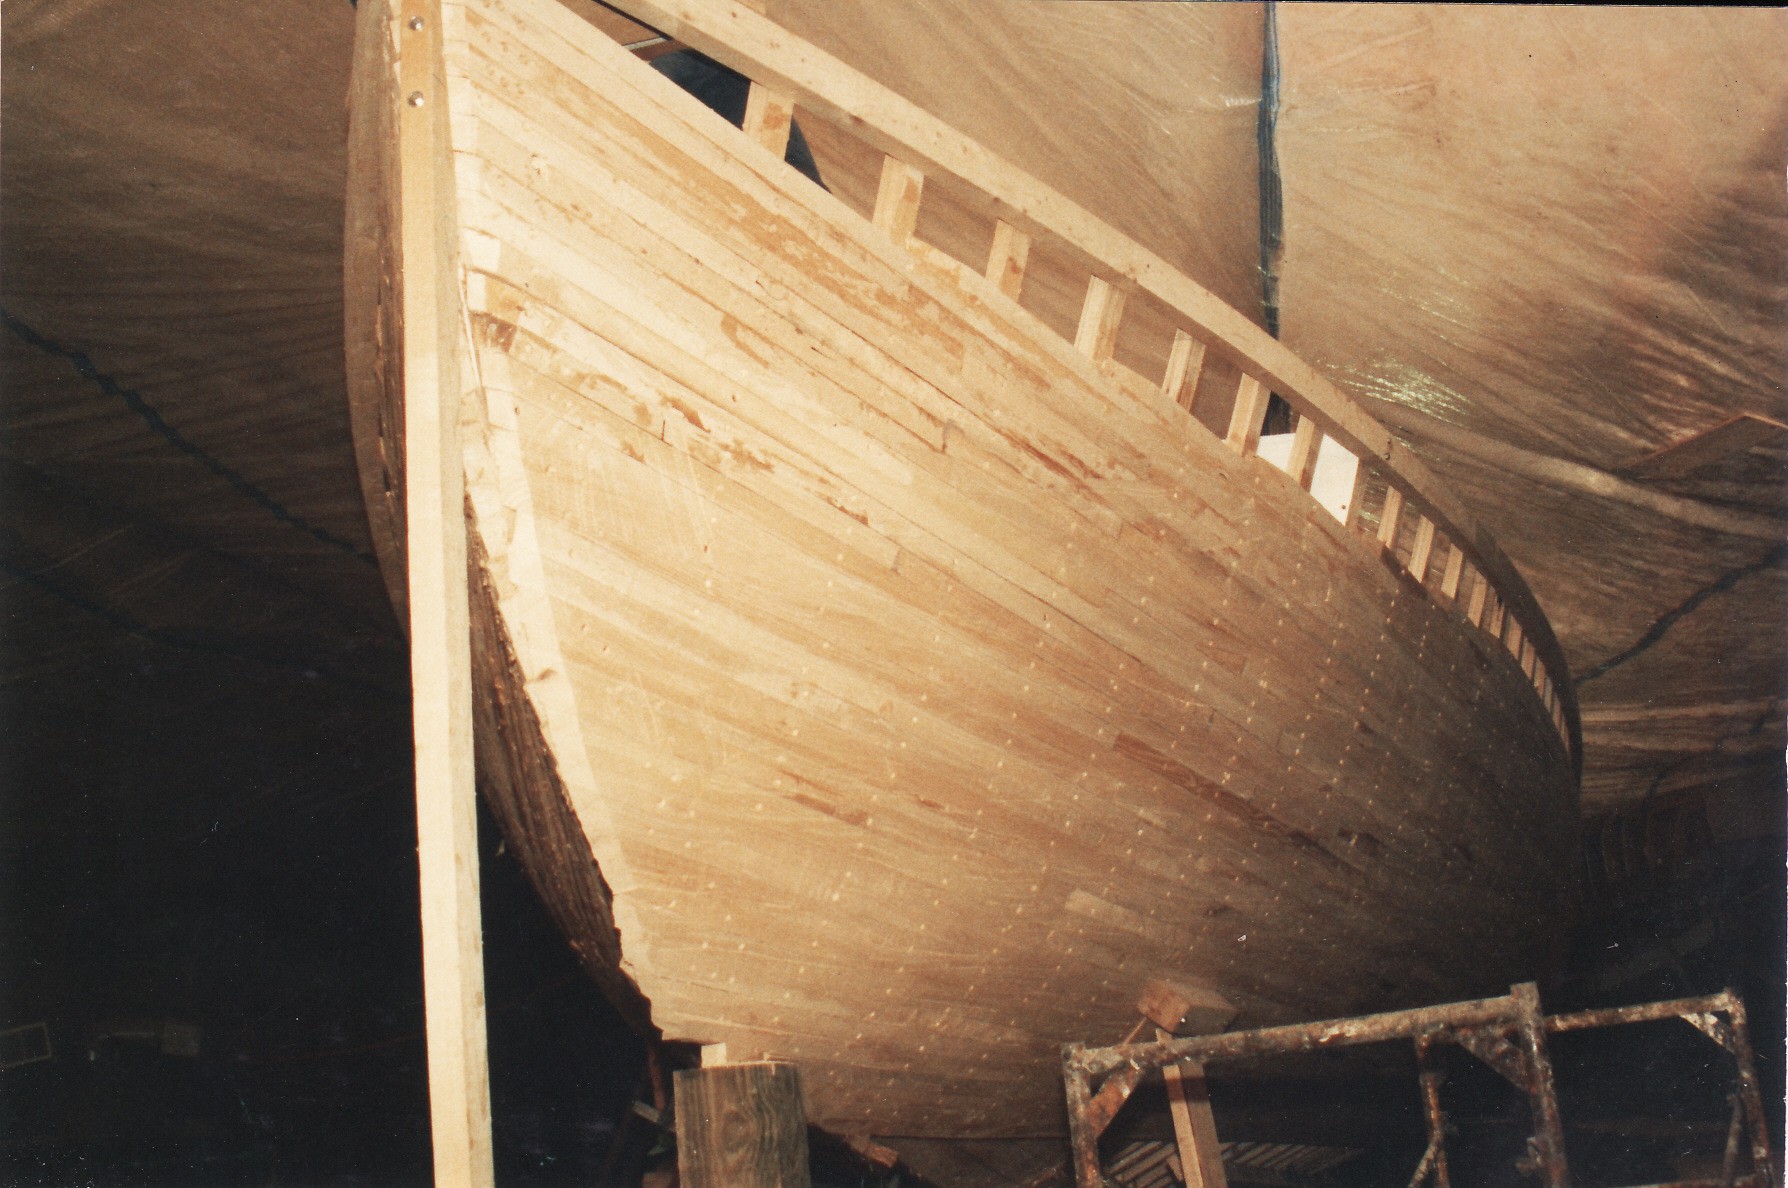 Schooner Woodwind was commisioned late 1992. This picture was taken in eary 1993.